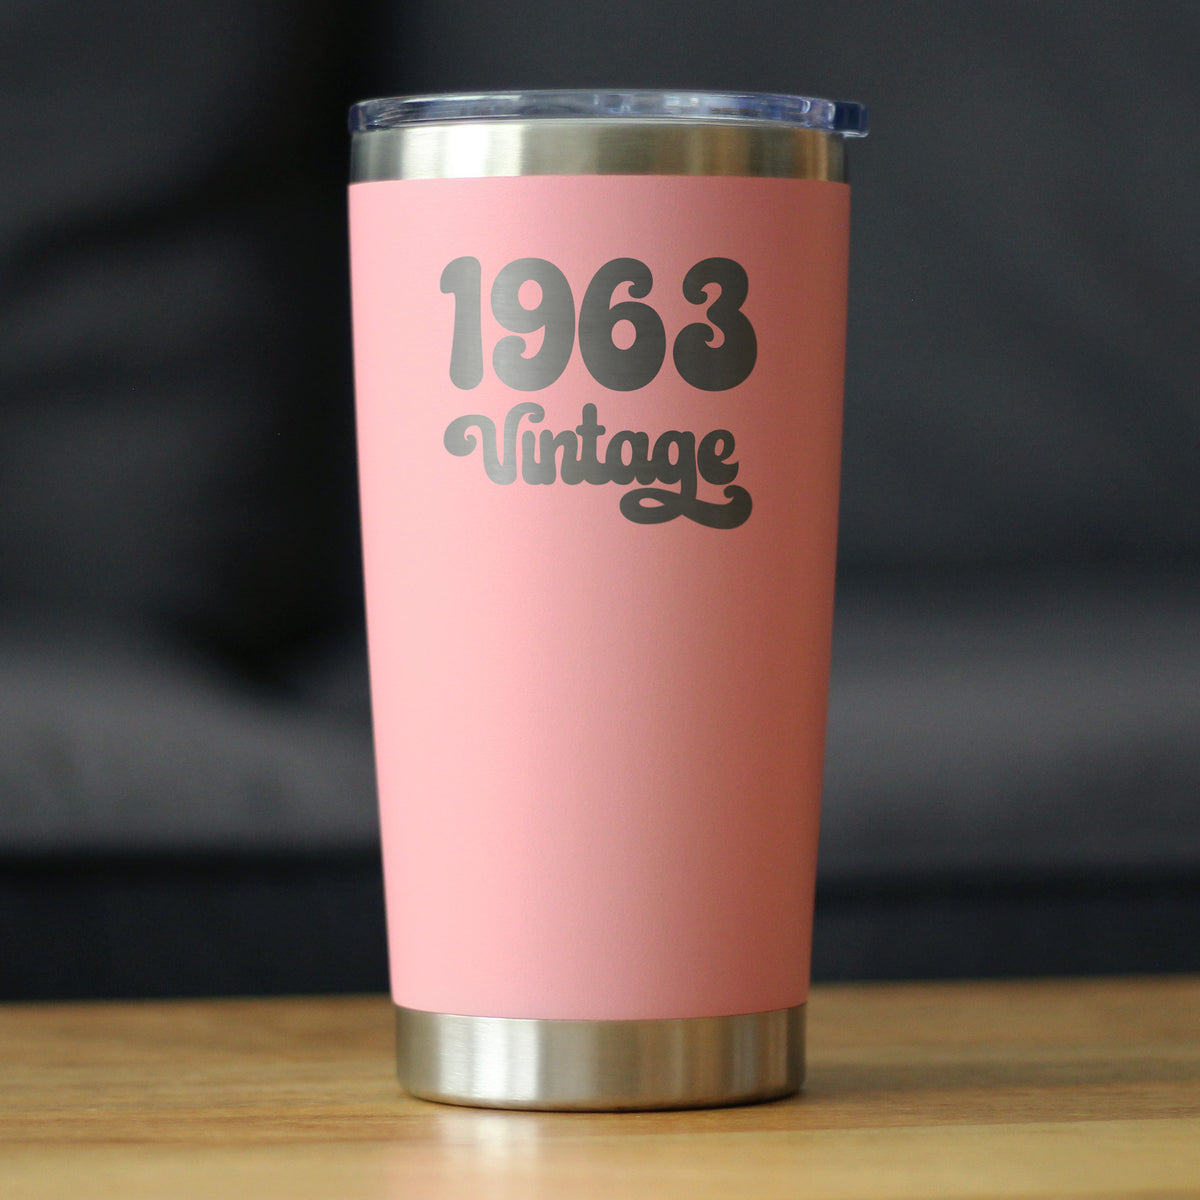 Vintage 1963 - Insulated Coffee Tumbler Cup with Sliding Lid - 20 oz - Funny 61st Birthday Gift for Women or Men Turning 61